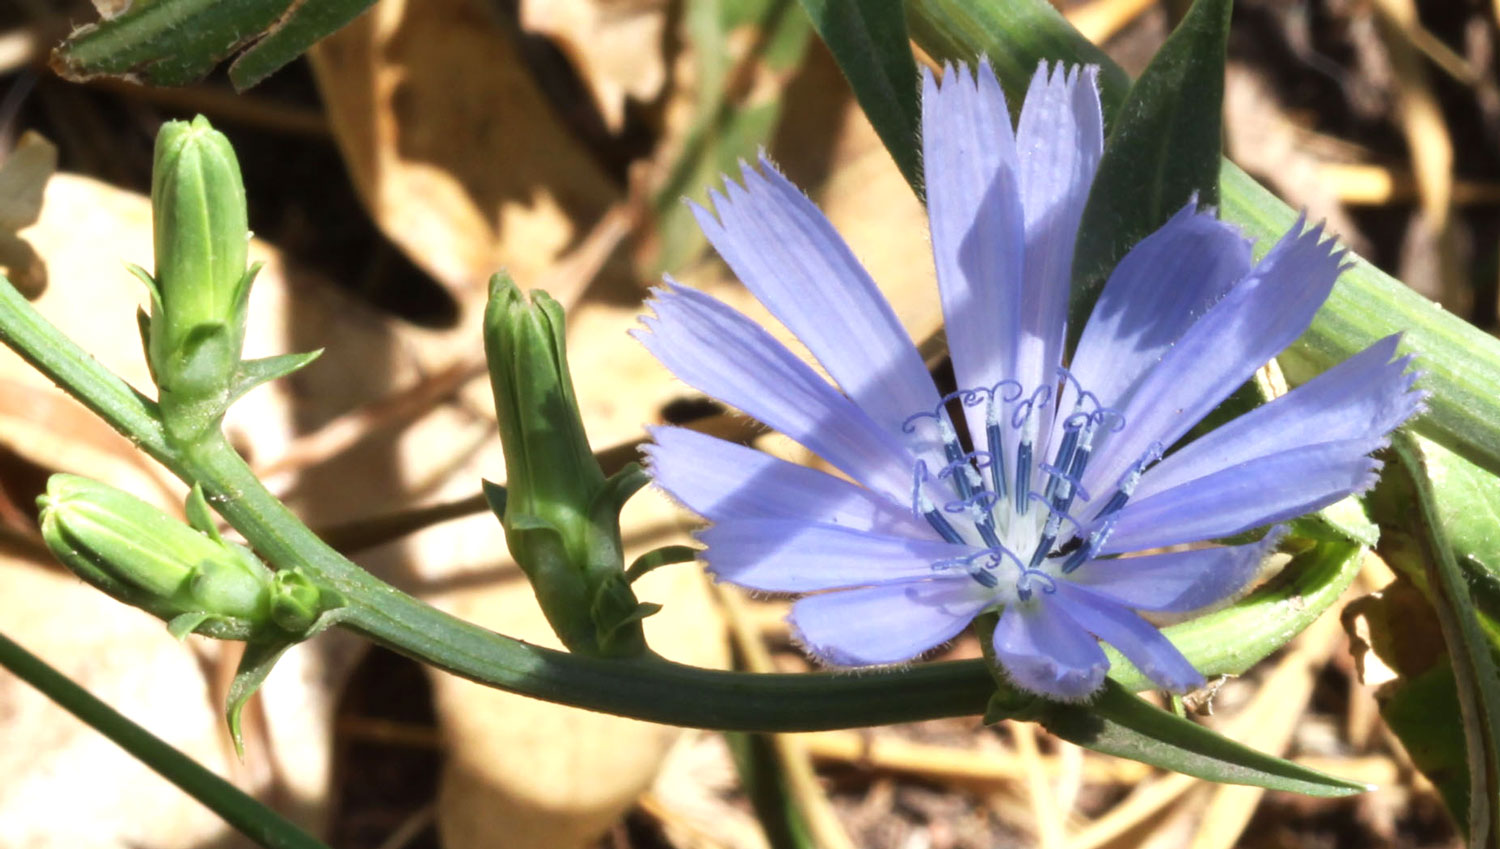 How to identify Chicory